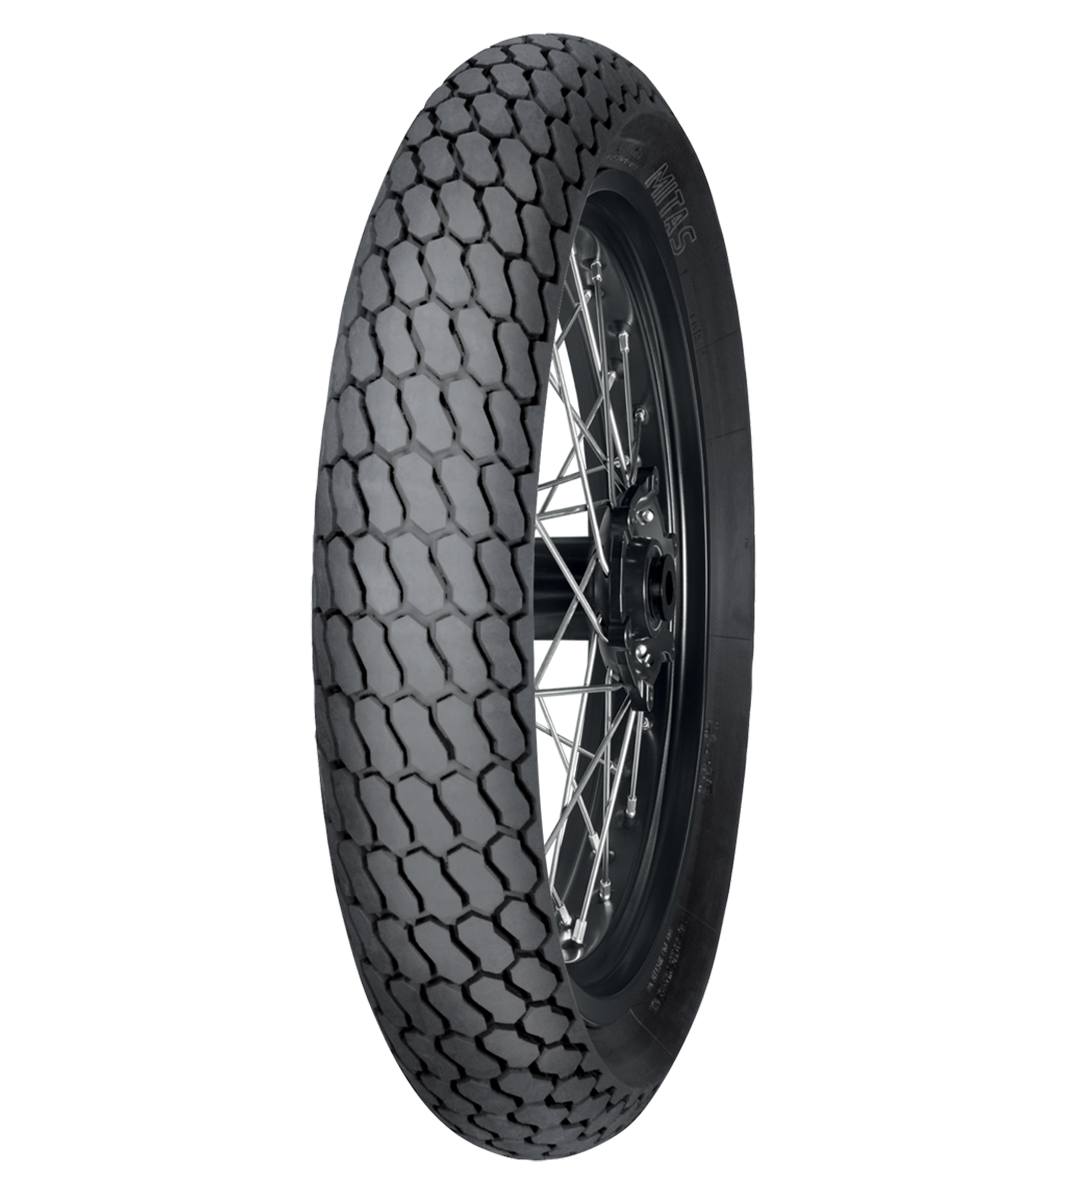 Mitas H-18 FLAT TRACK 130/80-19 (27x7-19) Flat Track Off-Road NHS Green Tube Front Tire, 223409, 130/80-19, Flat Track, Front, H-18 Flat Track, Off-Road, Tires - Imported and distributed in North & South America by Lindeco Genuine Powersports - Premier Powersports Equipment and Accessories for Motorcycle Enthusiasts, Professional Riders and Dealers.